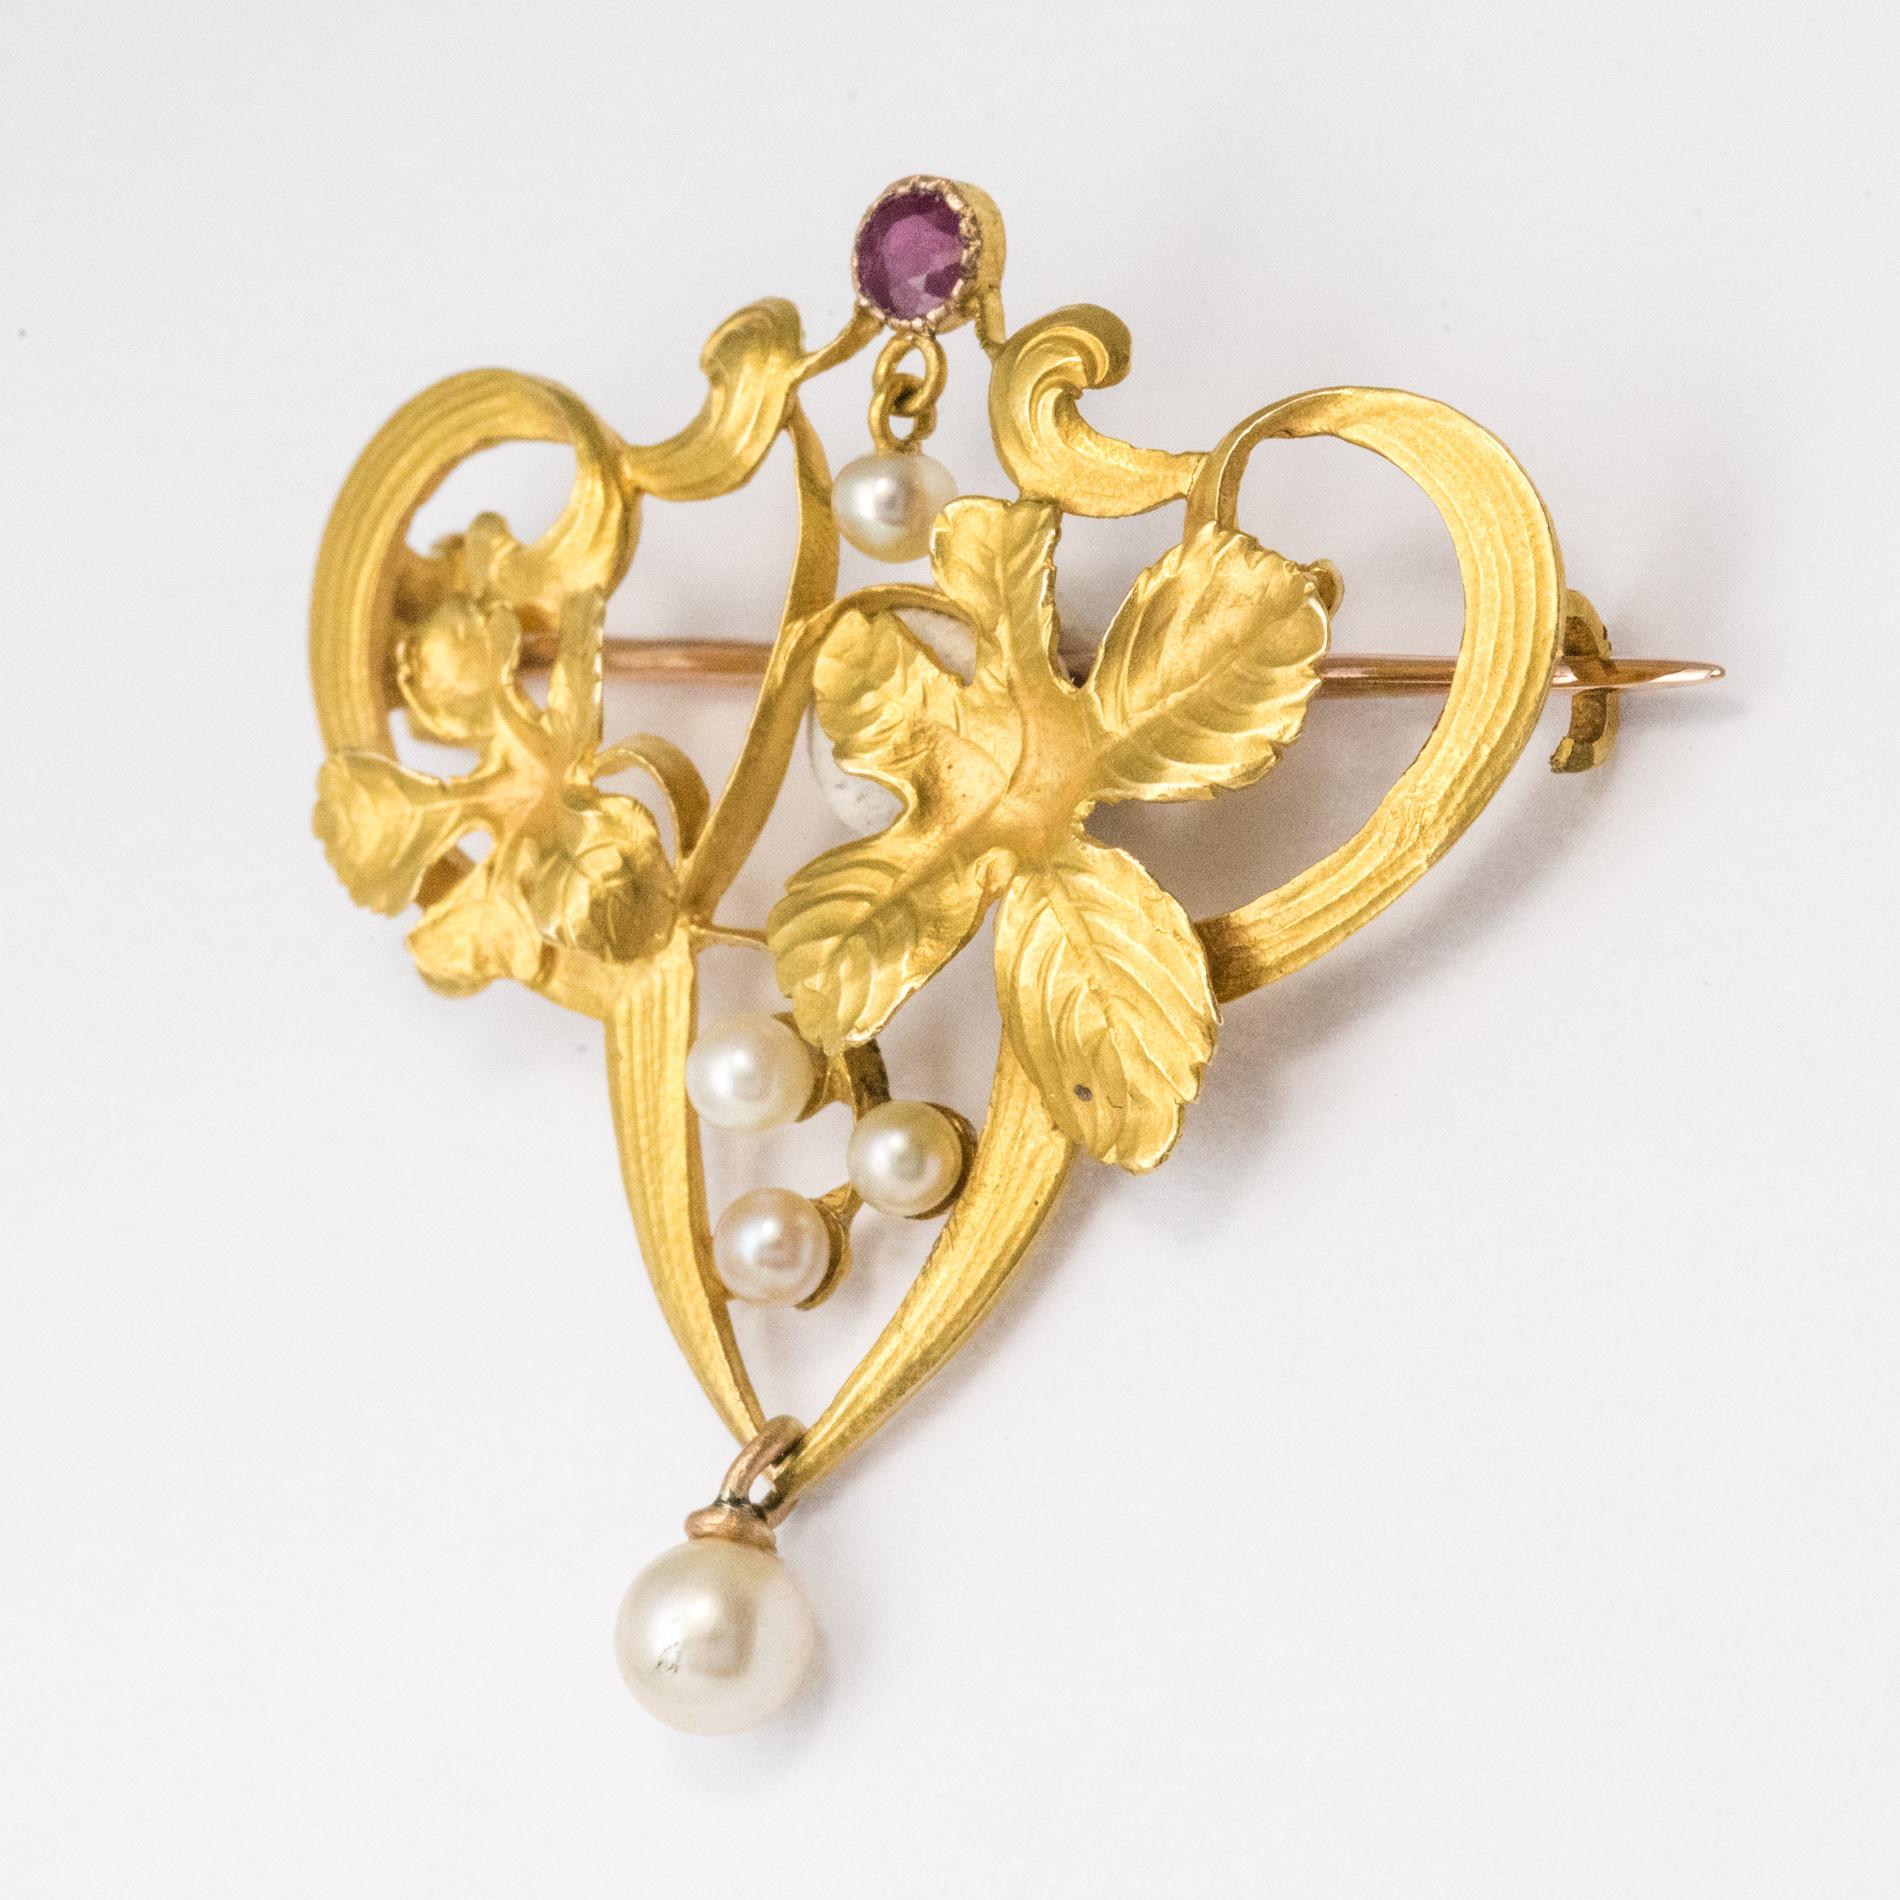 Brooch in 18 karat yellow gold, eagle's head hallmark.
A delightful Art Nouveau jewel, it represents a foliage set with three small natural pearls topped with a bezel-set ruby. Under the ruby and at the end of the brooch are set in tassel two